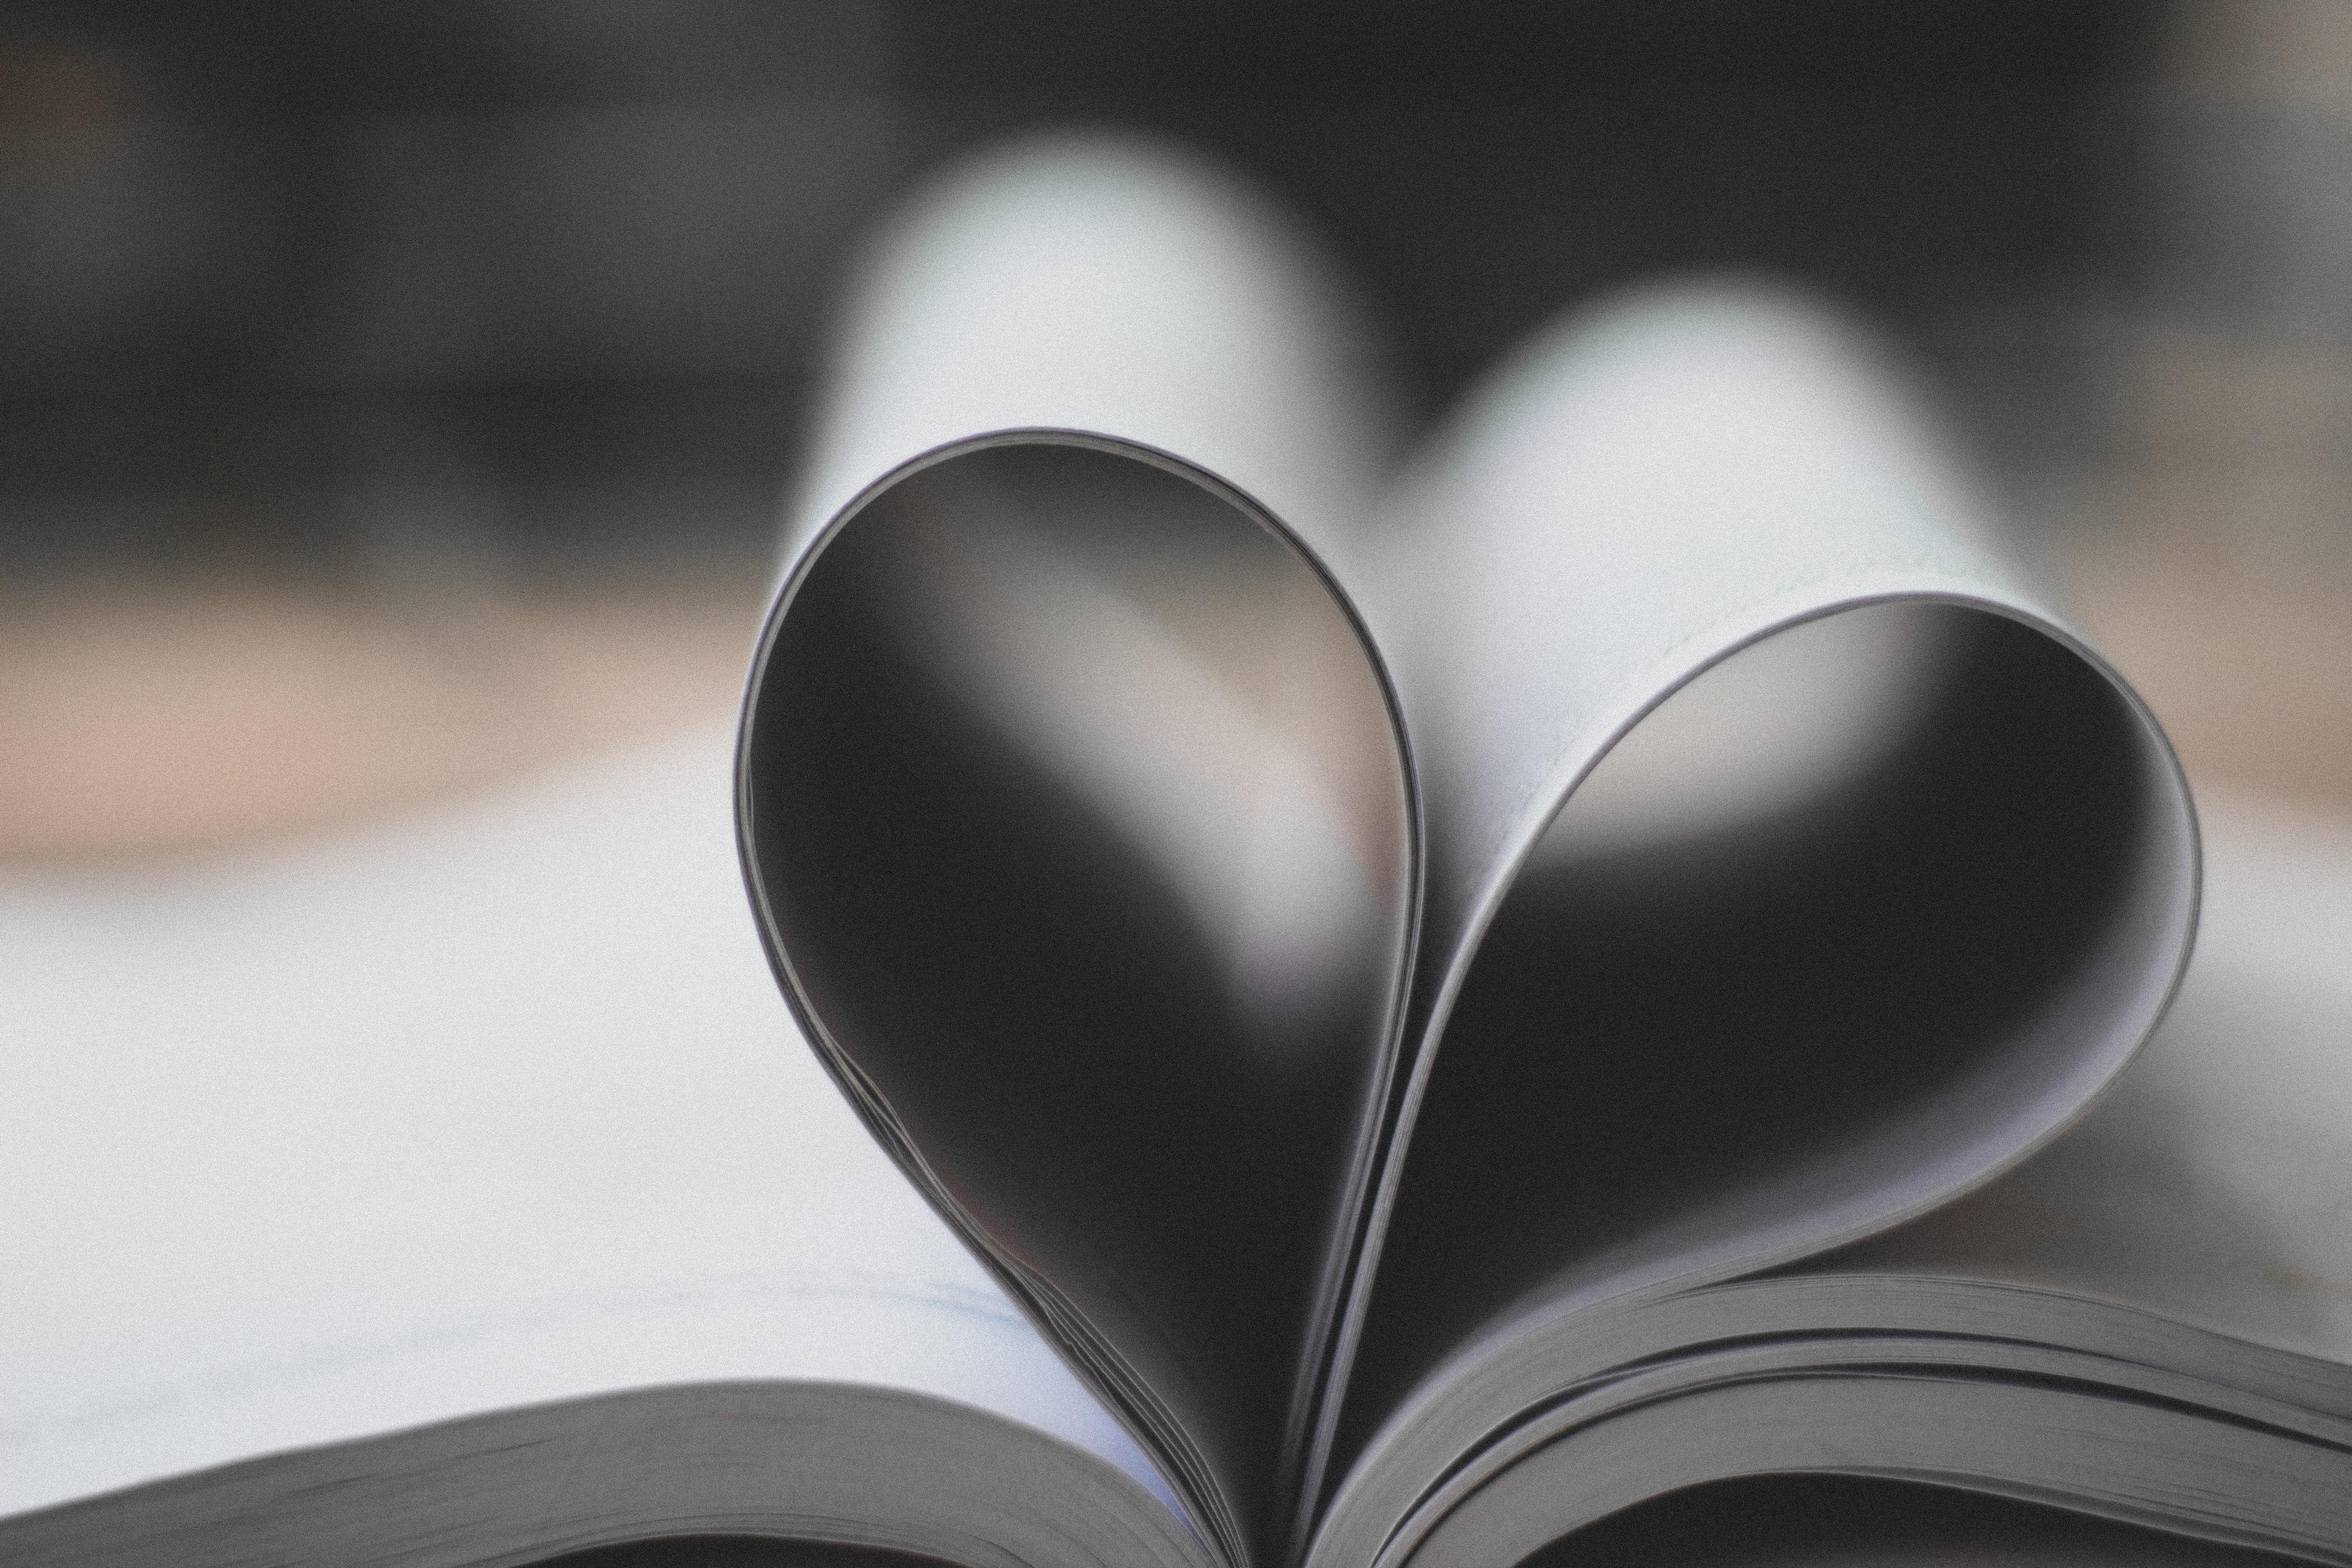 Book in the shape of a heart